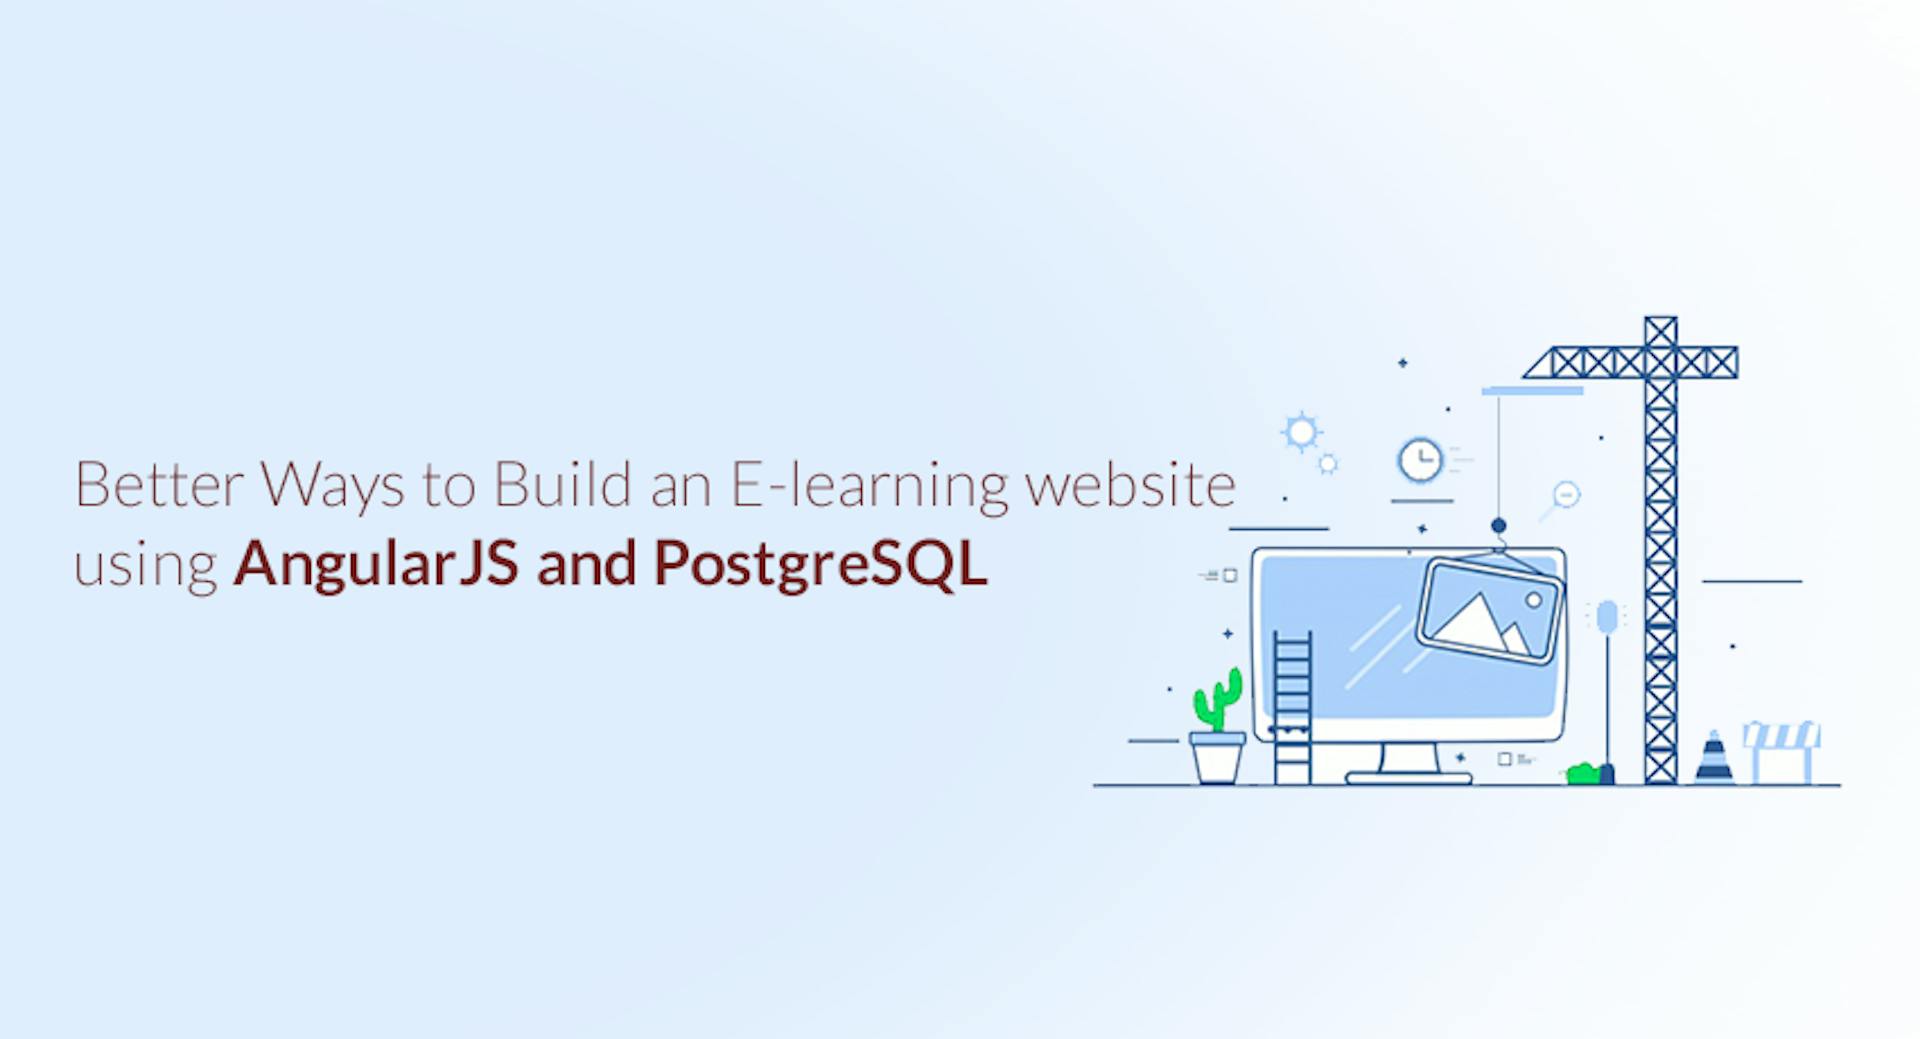 featured image - Better Ways to Build an E-learning website using AngularJS and PostgreSQL